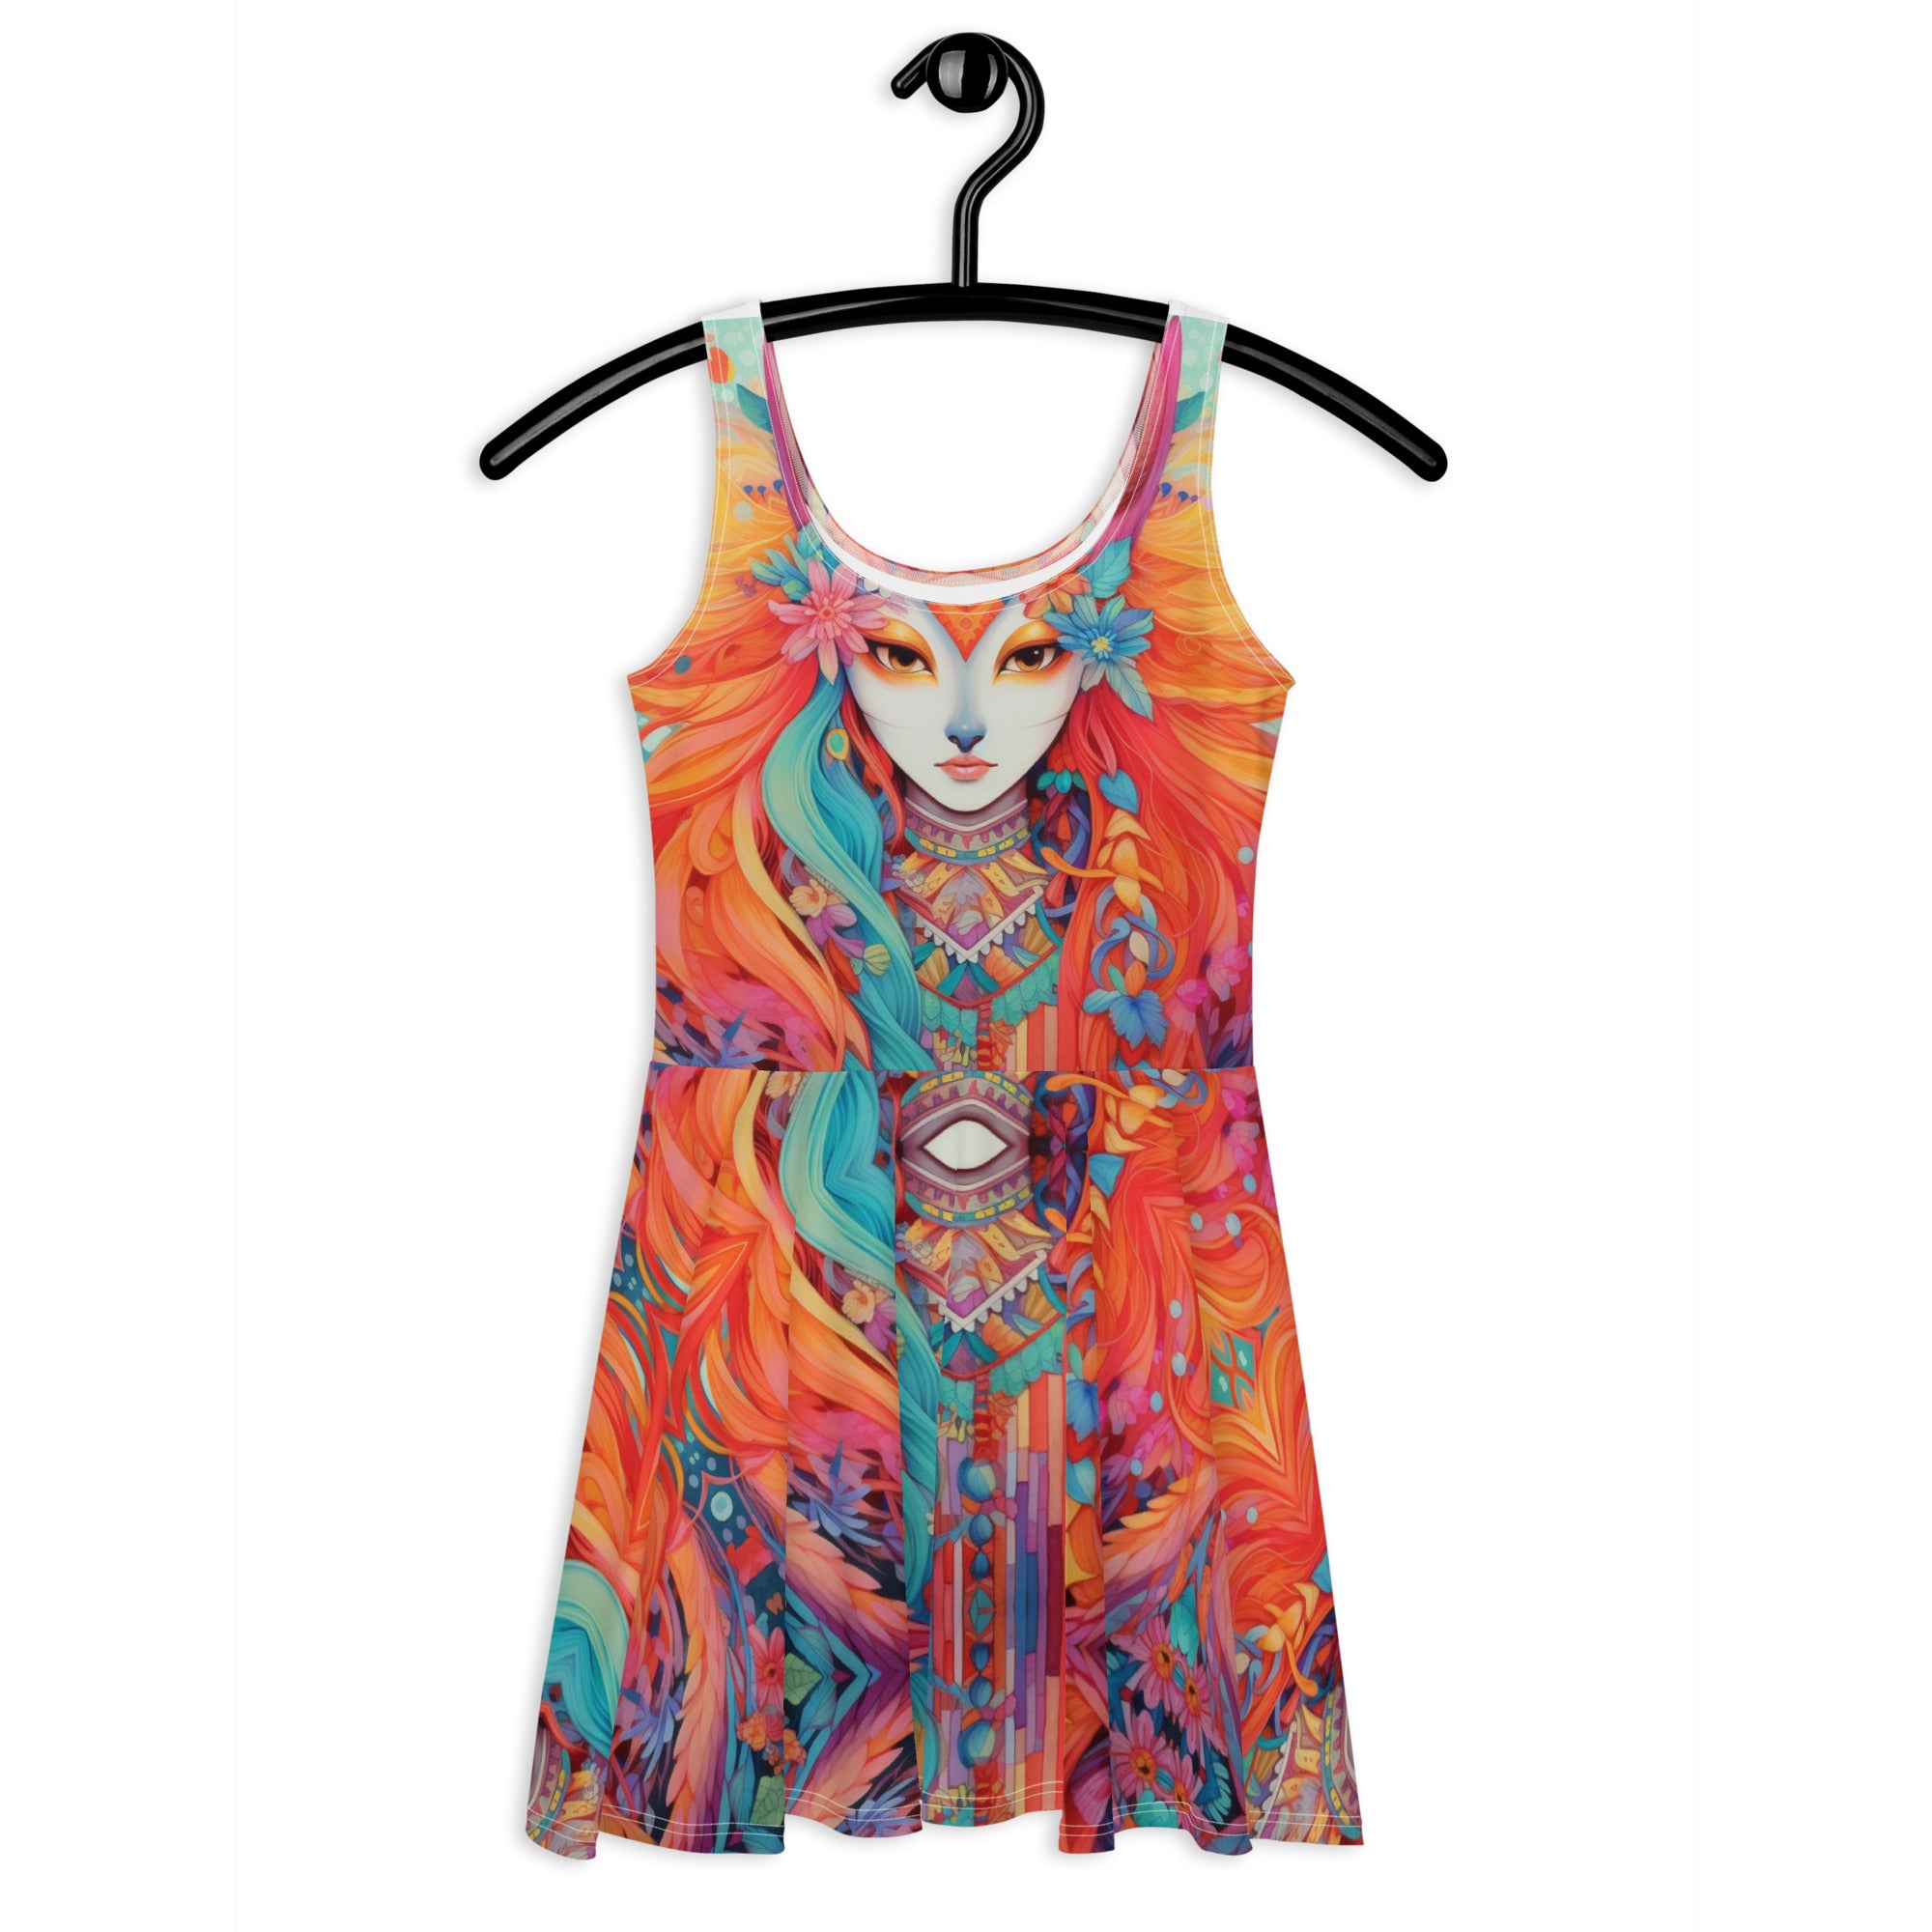 Stunning Kitsune Fairy Skater Dress - A Vibrant and Flattering Addition to Your Wardrobe!